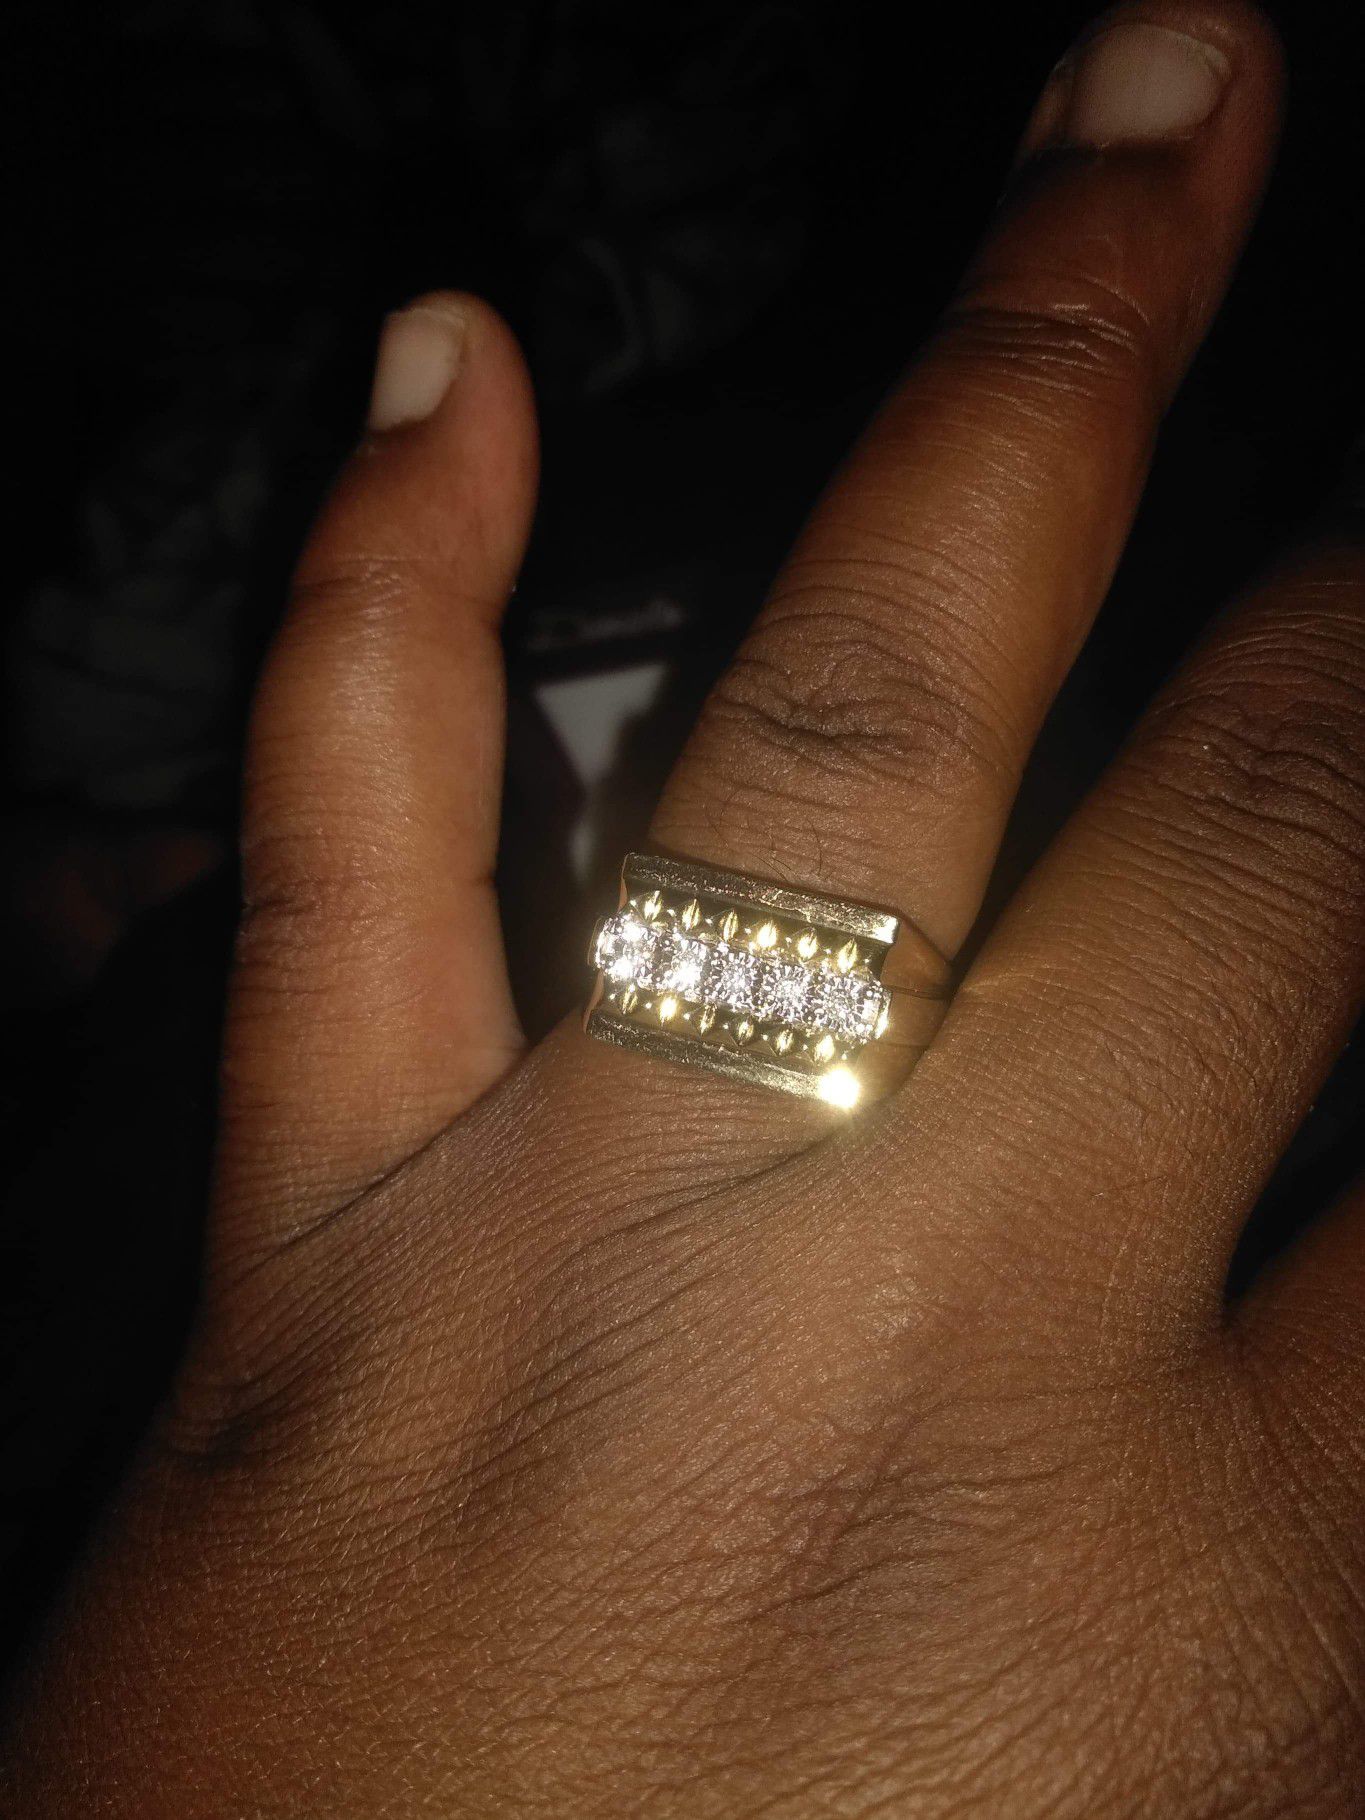 Beautiful diamond 10k men's ring size 10 $1300 willing to go down but no lower than $1100